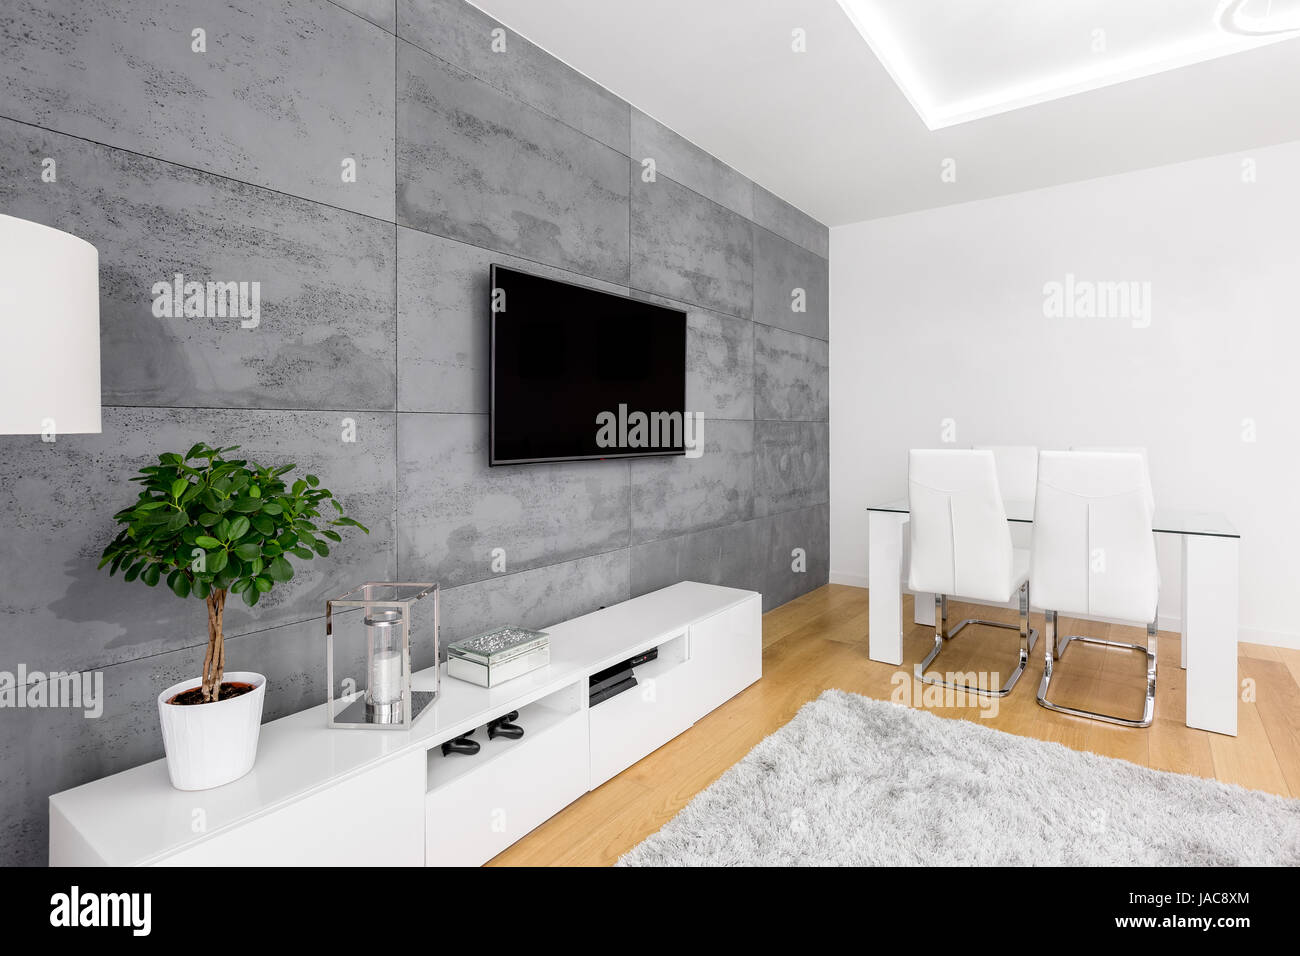 Modern living room with decorative concrete wall, tv, cabinet, table and chairs Stock Photo